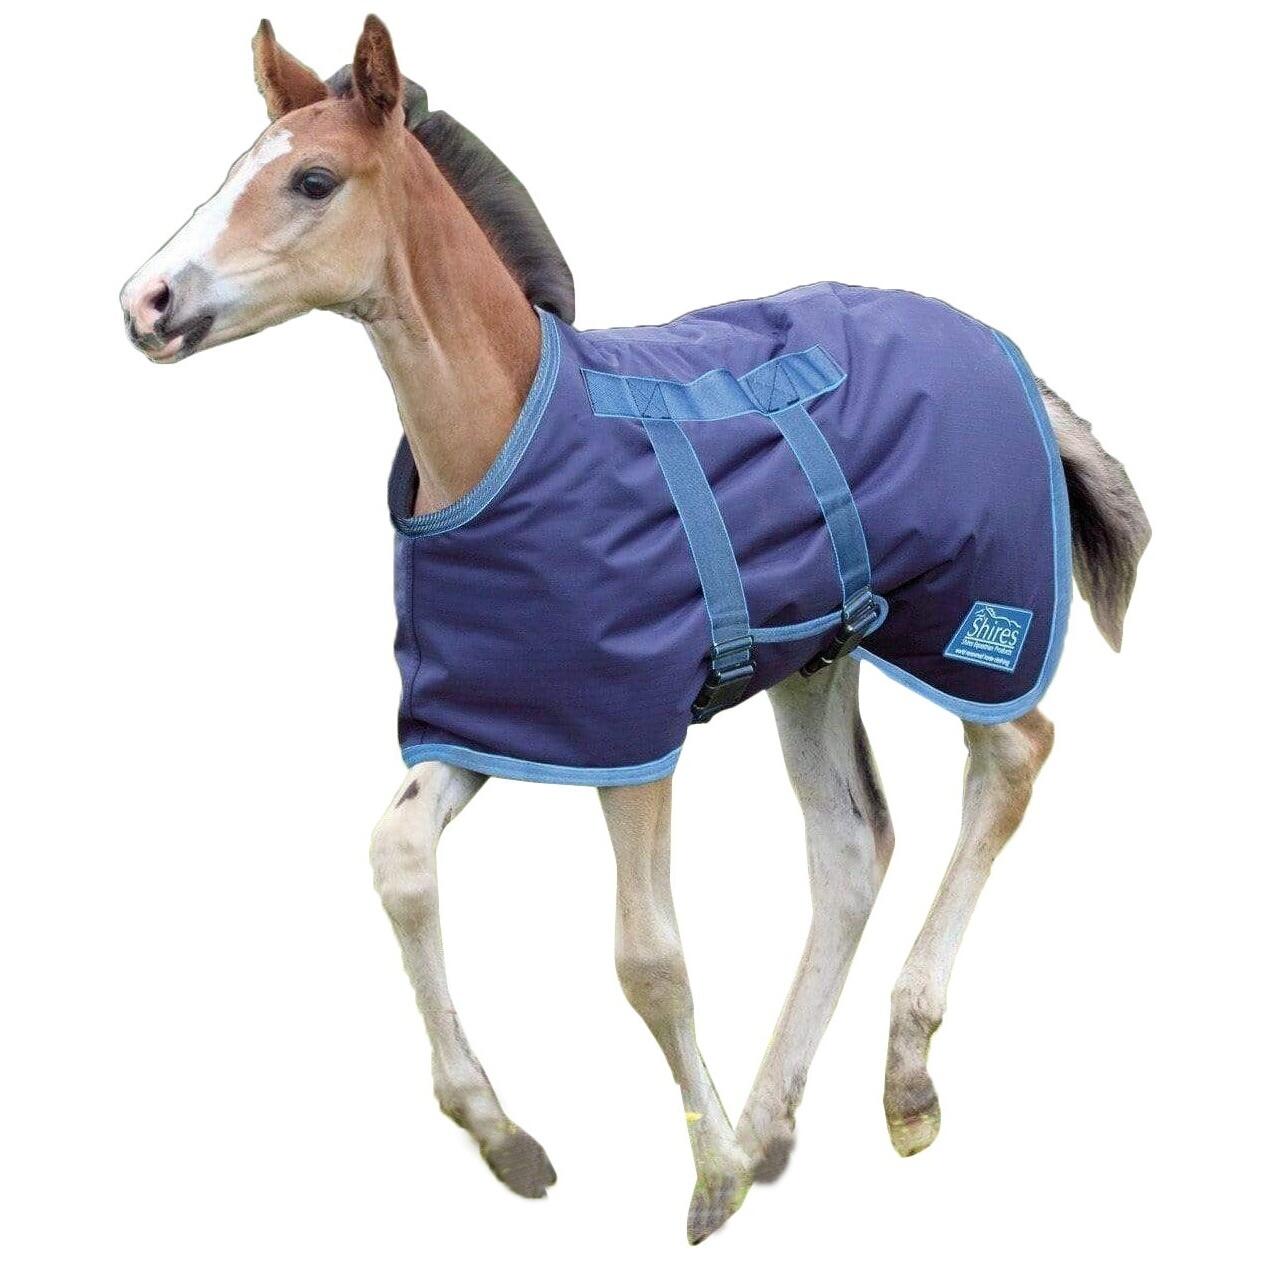 SHIRES Tempest Original Foal Turnout Rug (Navy/Turquoise)